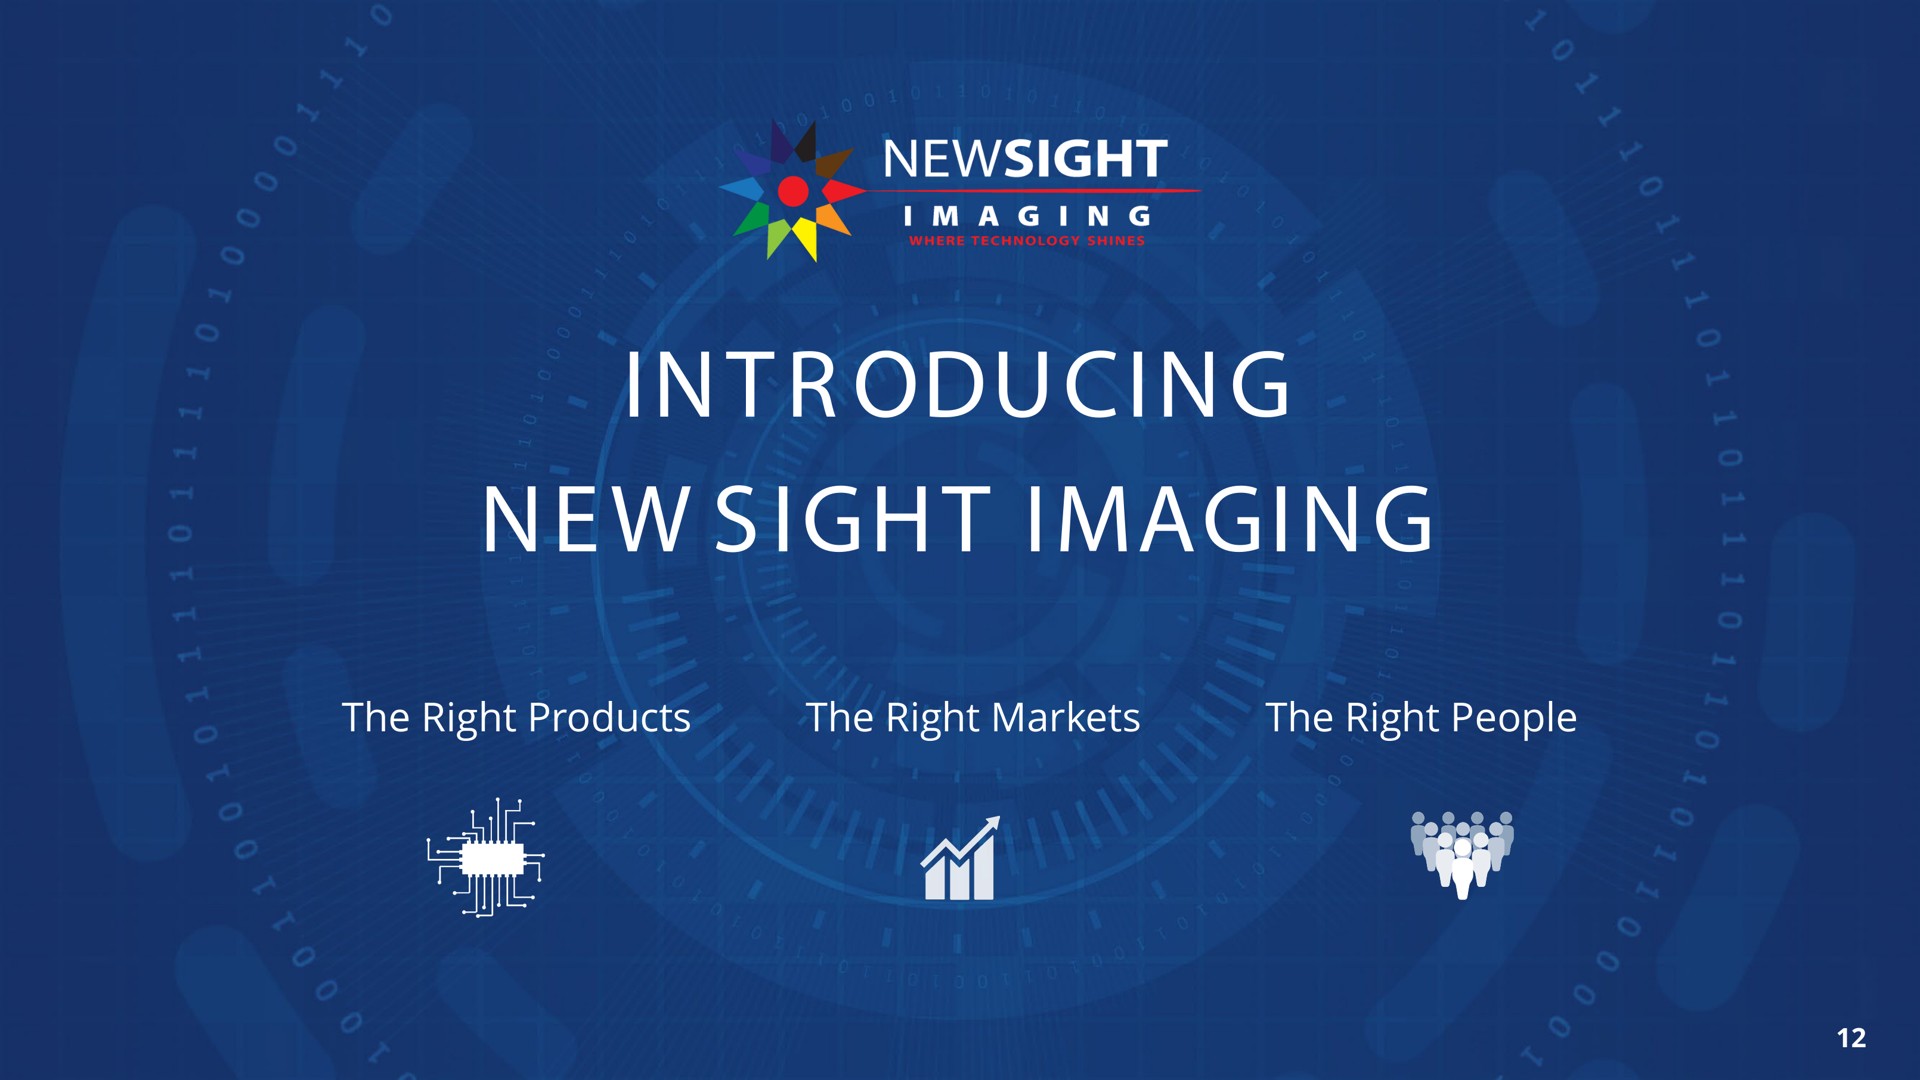 imaging the right products the right markets the right people introducing new sight a ula cole | Newsight Imaging